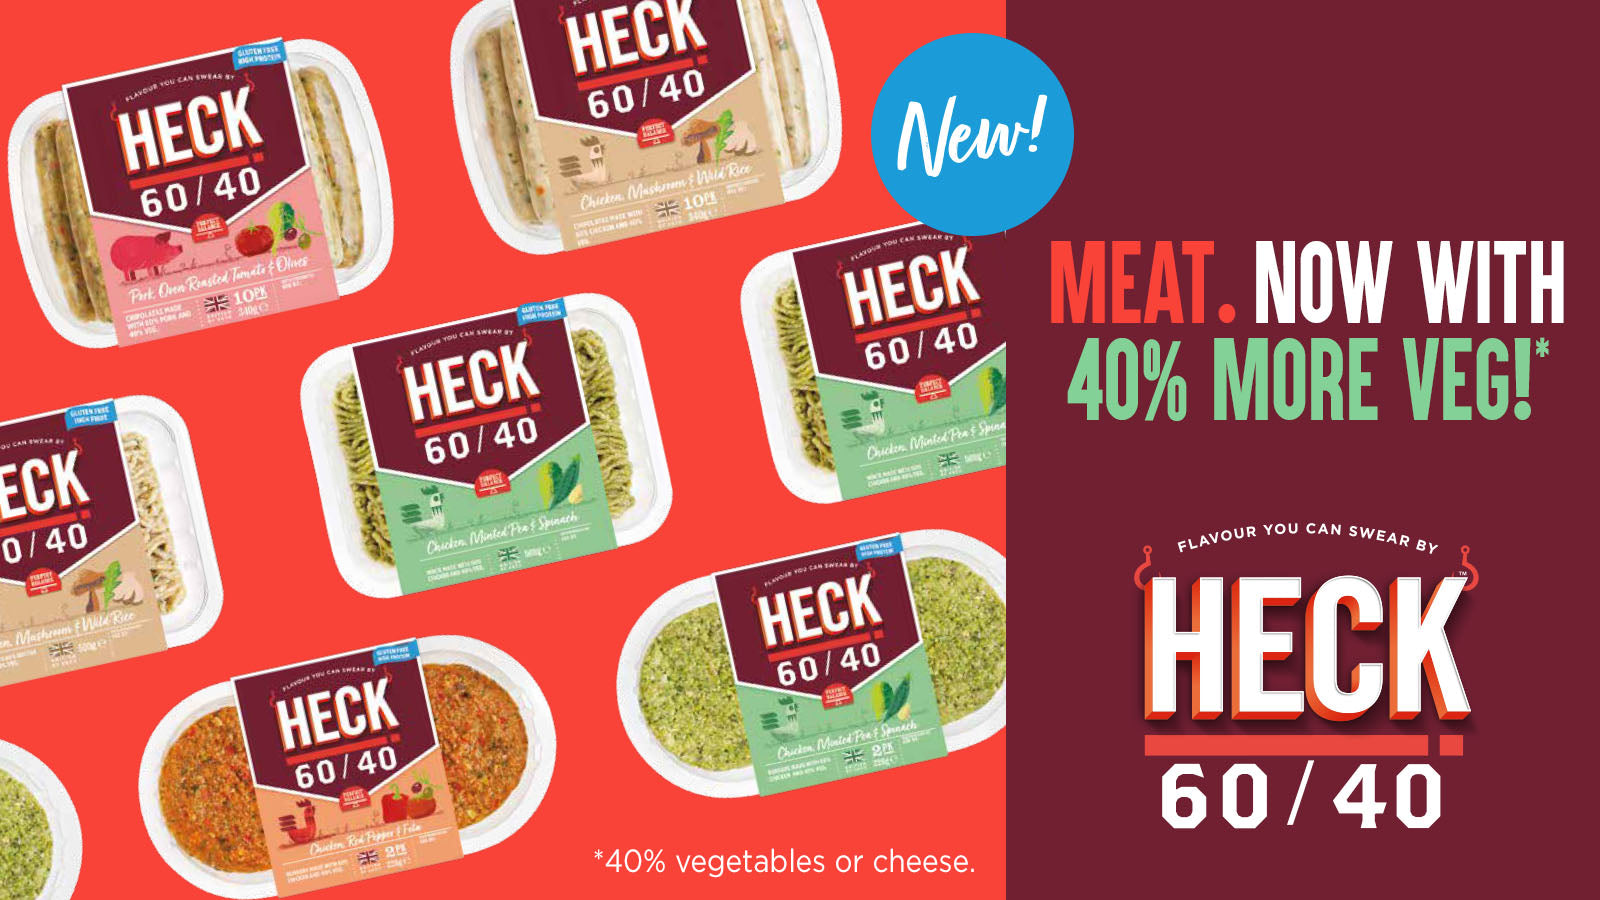 Hello HECK 60/40! Six New Flexi Lines Ready to Grab at Tesco Stores RIGHT NOW